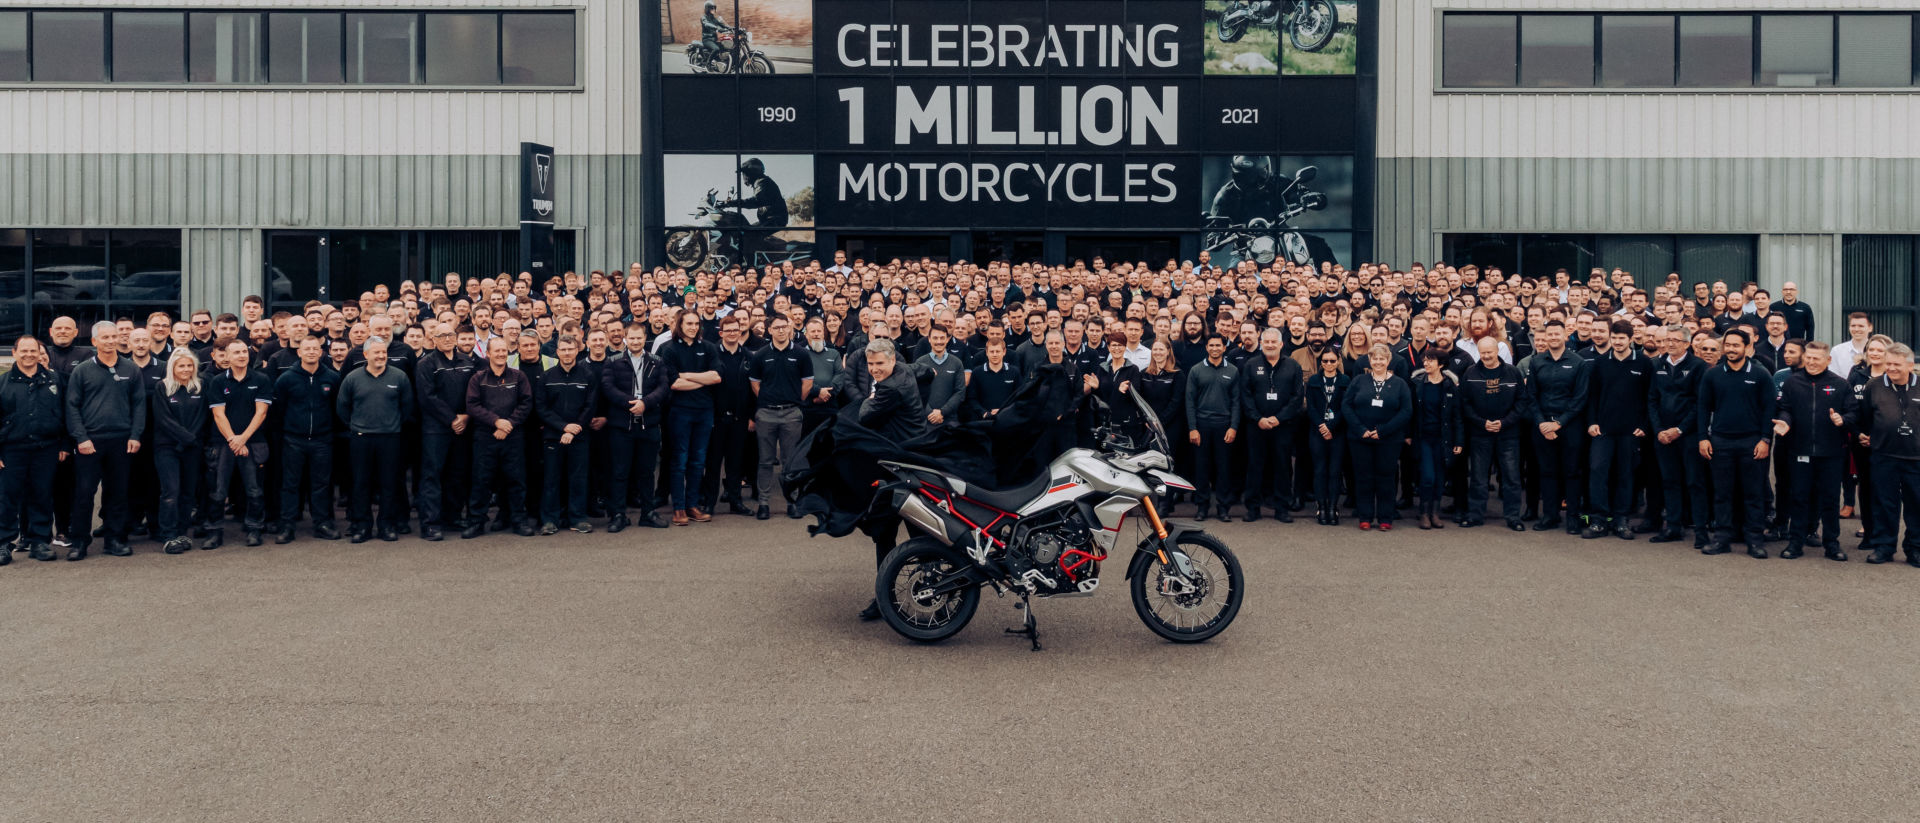 Nick Bloor, CEO of Triumph Motorcycles, unveils the one-millionth Triumph motorcycle produced at the Hinckley factory since the company's rebirth in 1990. Photo courtesy Triumph Motorcycles.